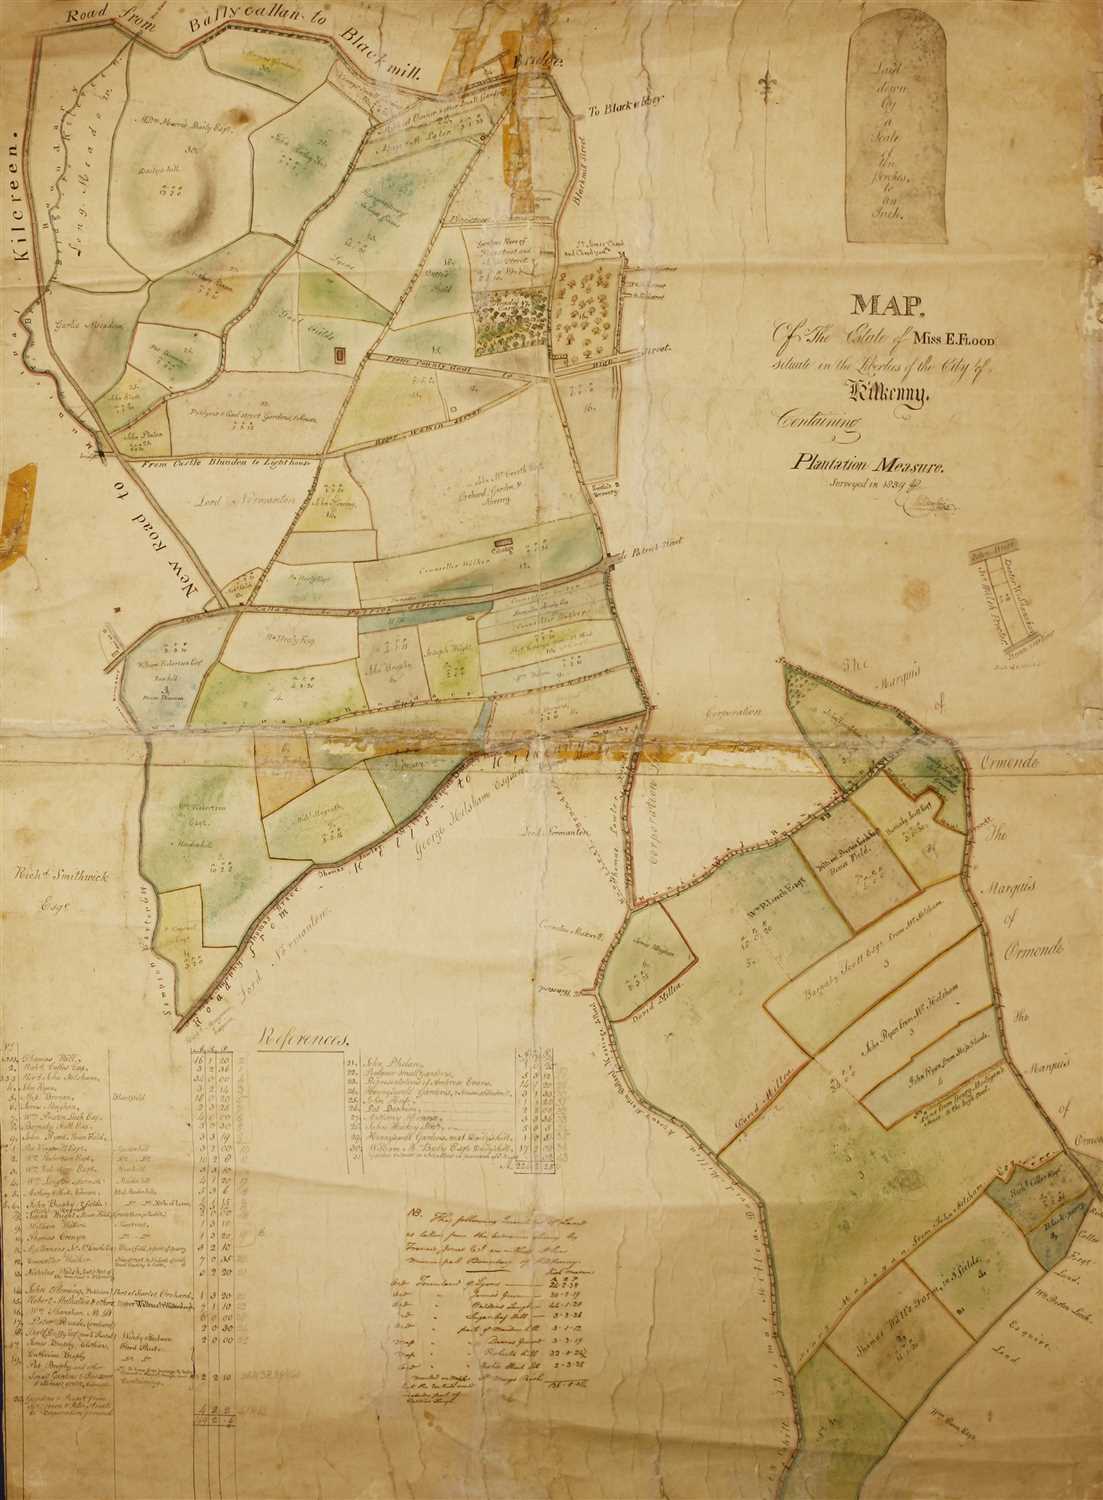 Lot 41 - IRISH INTEREST: Original Hand drawn and coloured MAP of the Estate of Miss. E. Flood